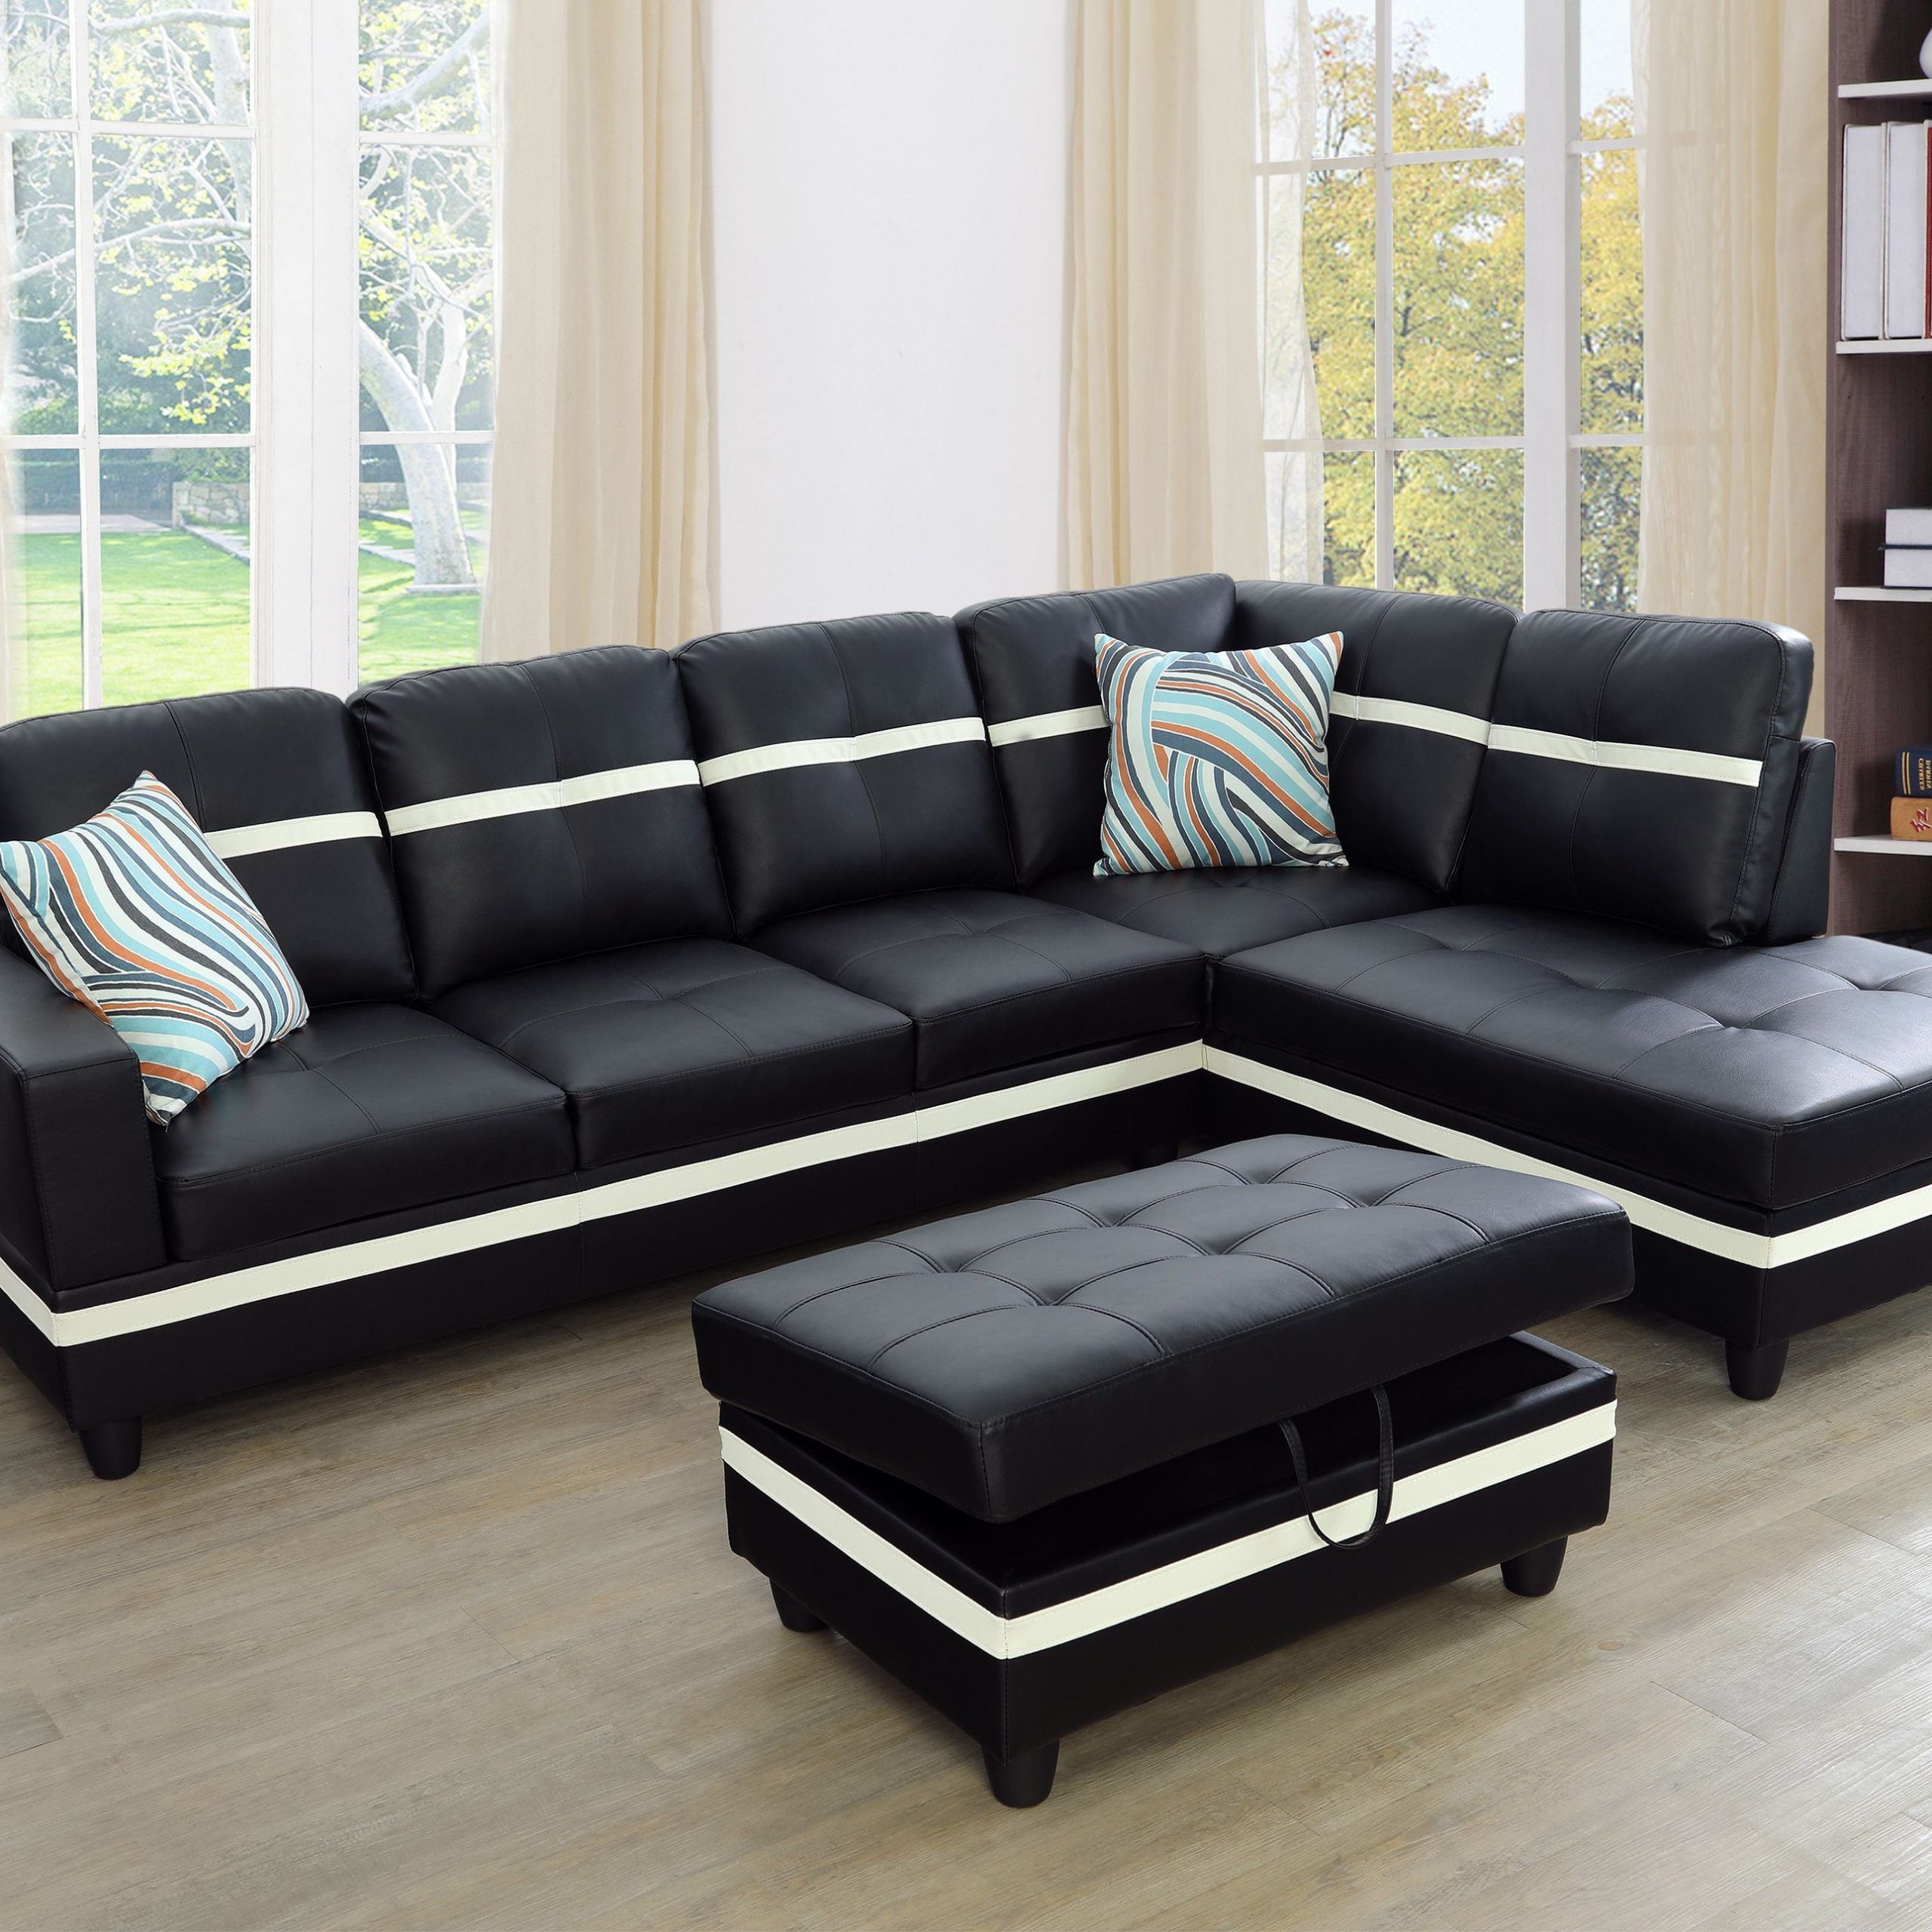 Aycp Furniture_new Style_ L Shape Sectional Sofa Set With Storage Within Right Facing Black Sofas (Gallery 3 of 20)